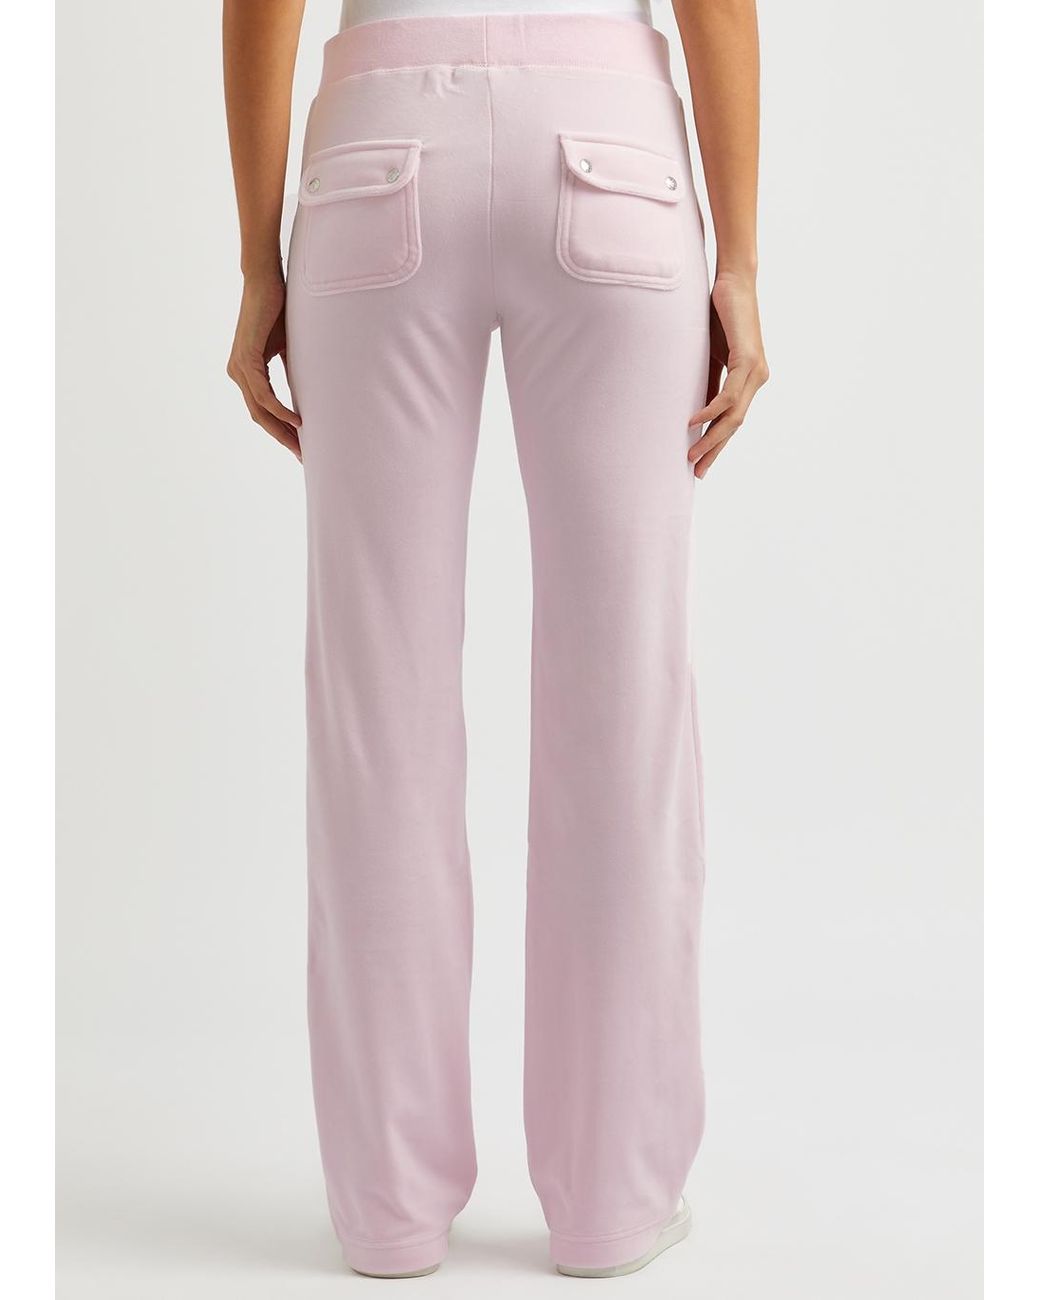 Juicy Couture Classic Del Ray Velour Sweatpants in Pink